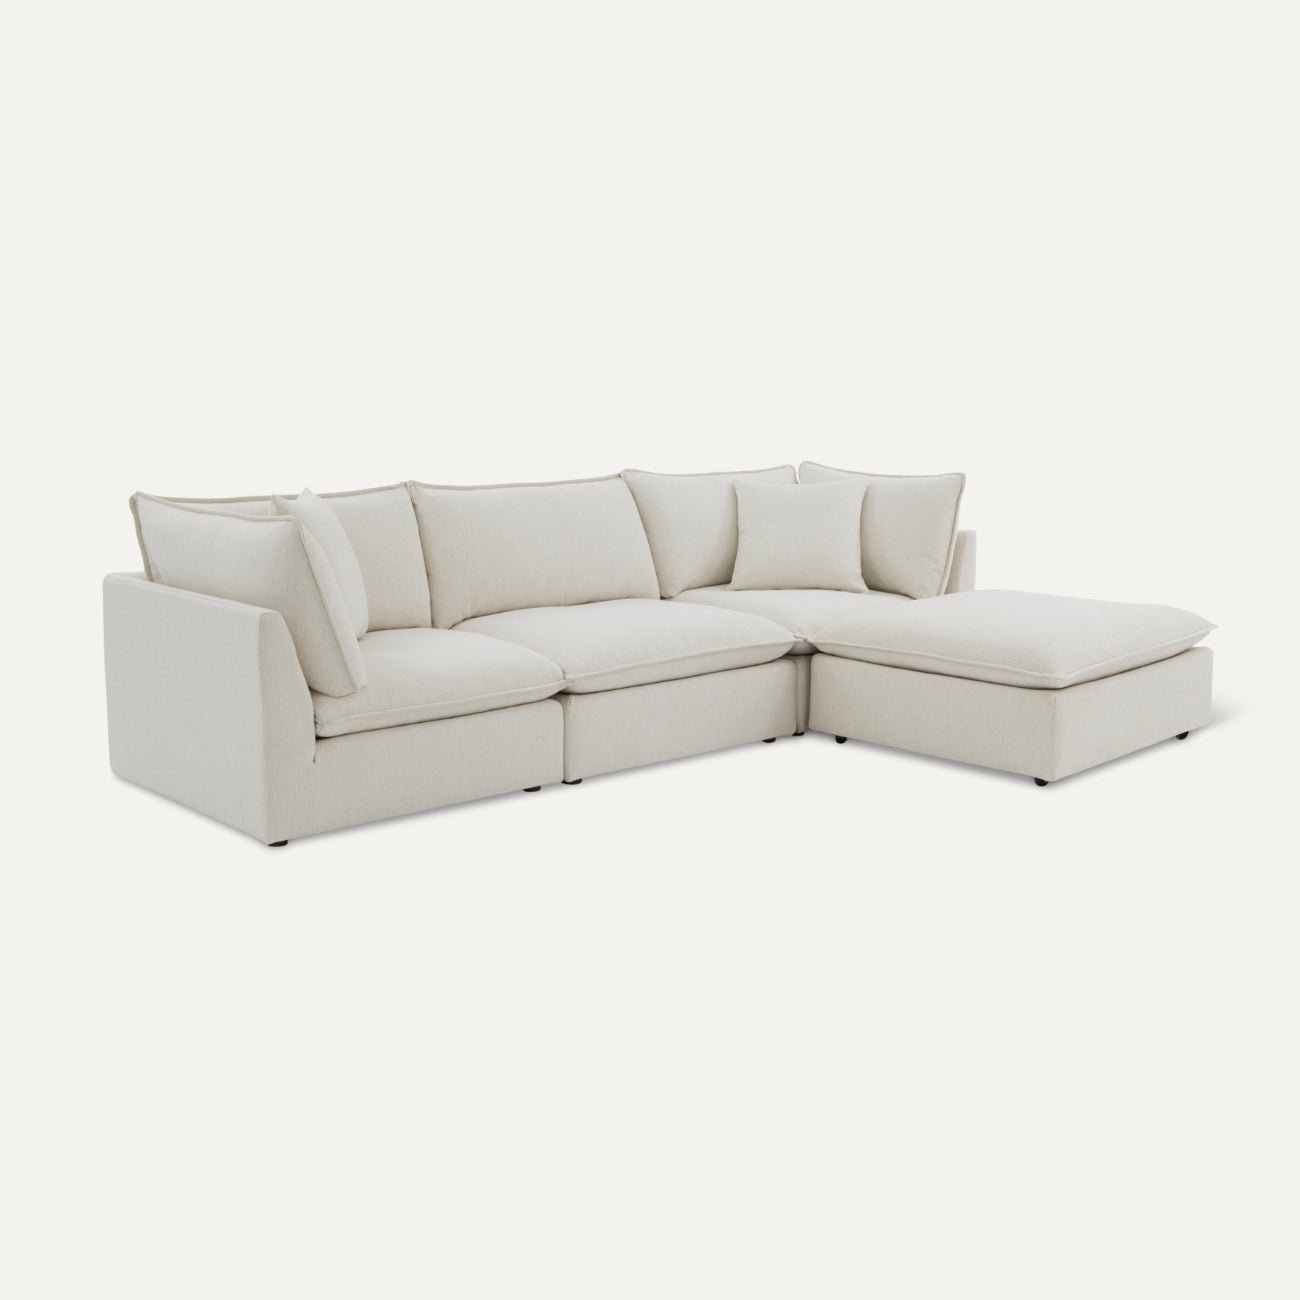 Chill Time 4-Piece Modular Sectional